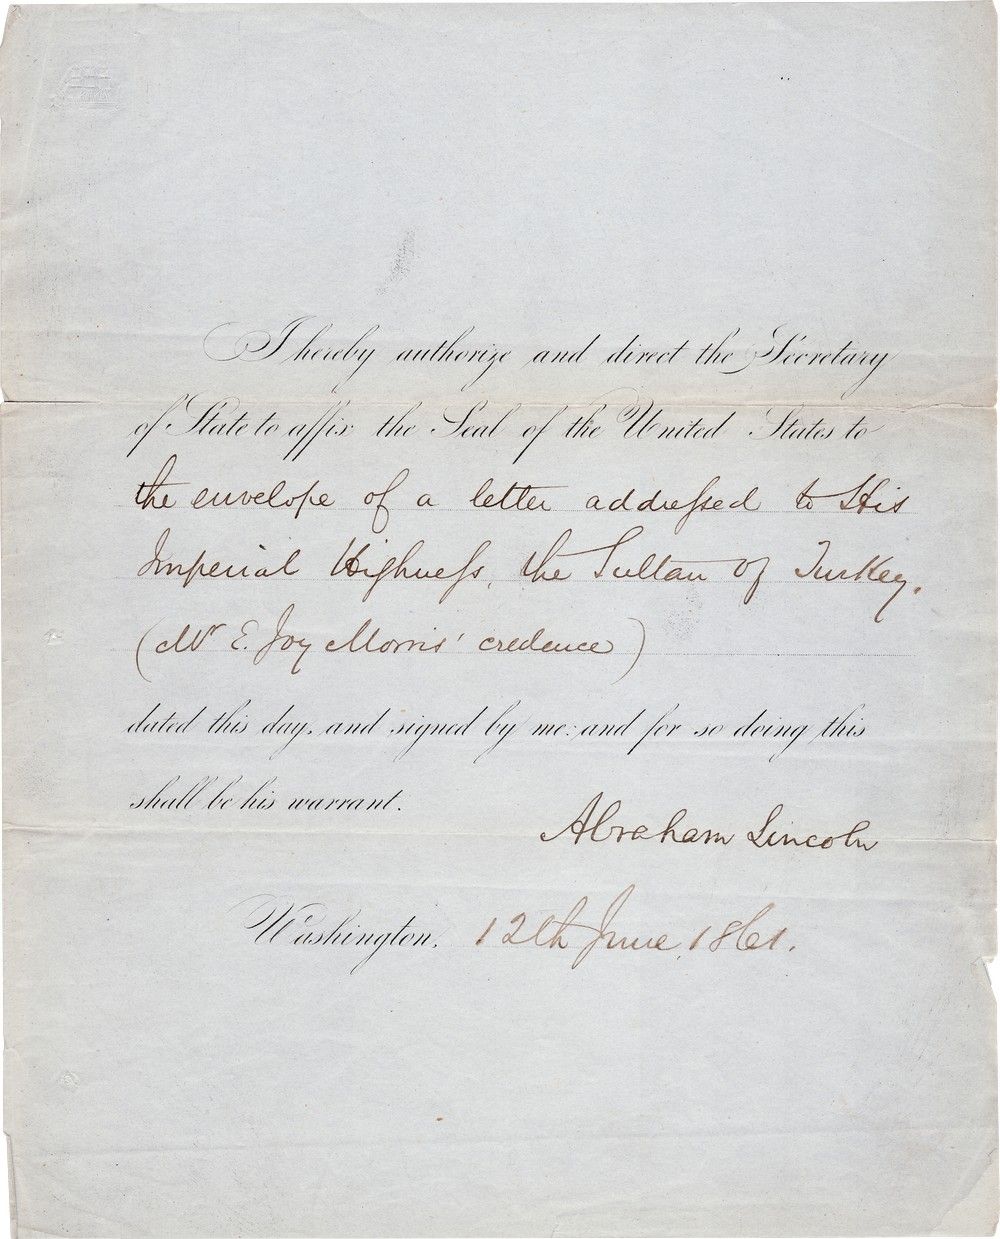 Abraham Lincoln Appoints the Arabist Edward Joy Morris as Minister Resident to Turkey